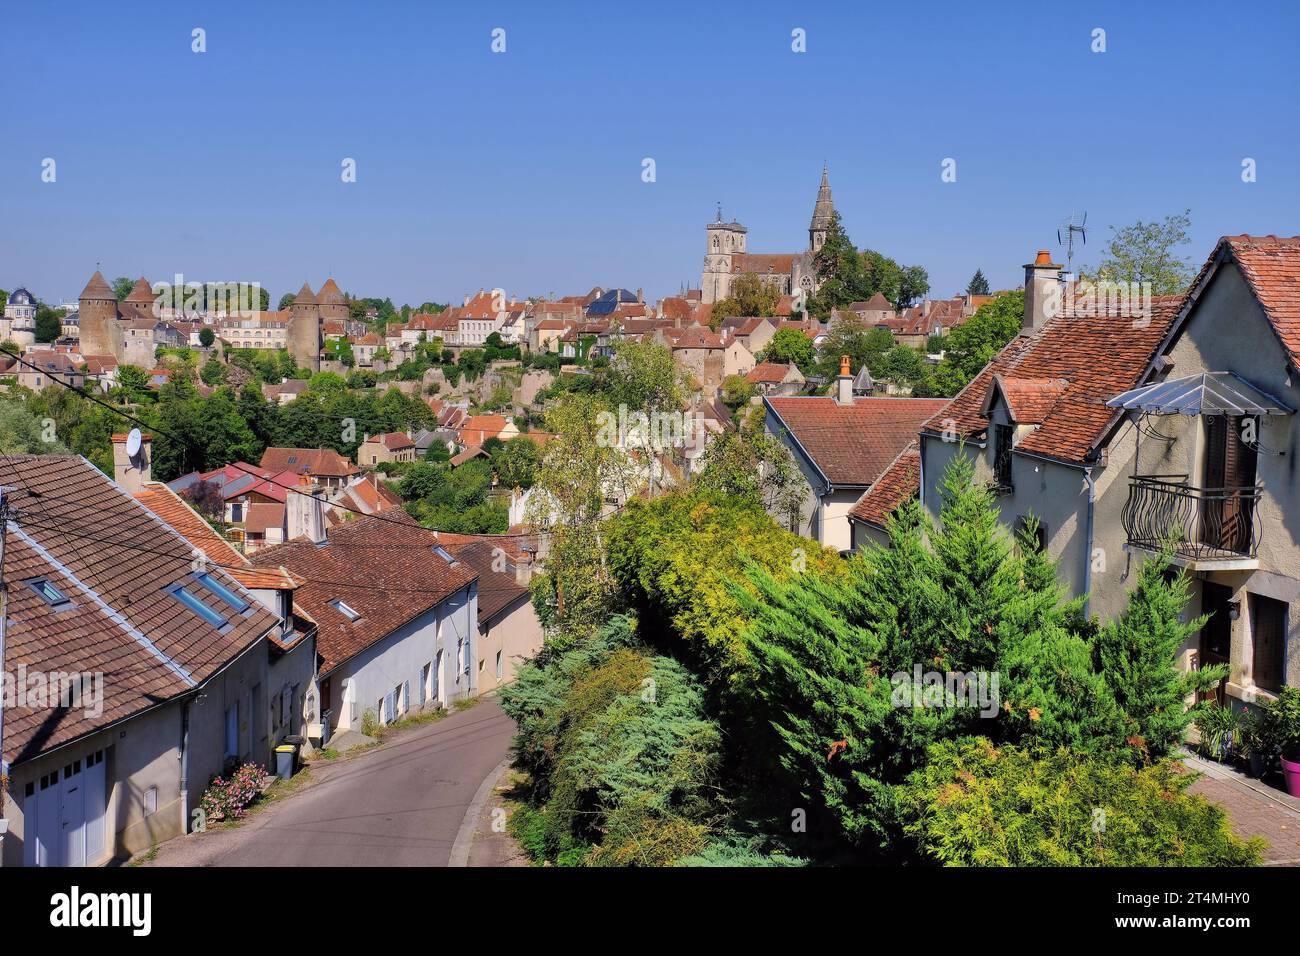 Semur-en-Auxois: Semur en Auxois from disused railway viaduct with fortification towers (tour) and church (Collégiale Notre-Dame), Burgundy, France Stock Photo